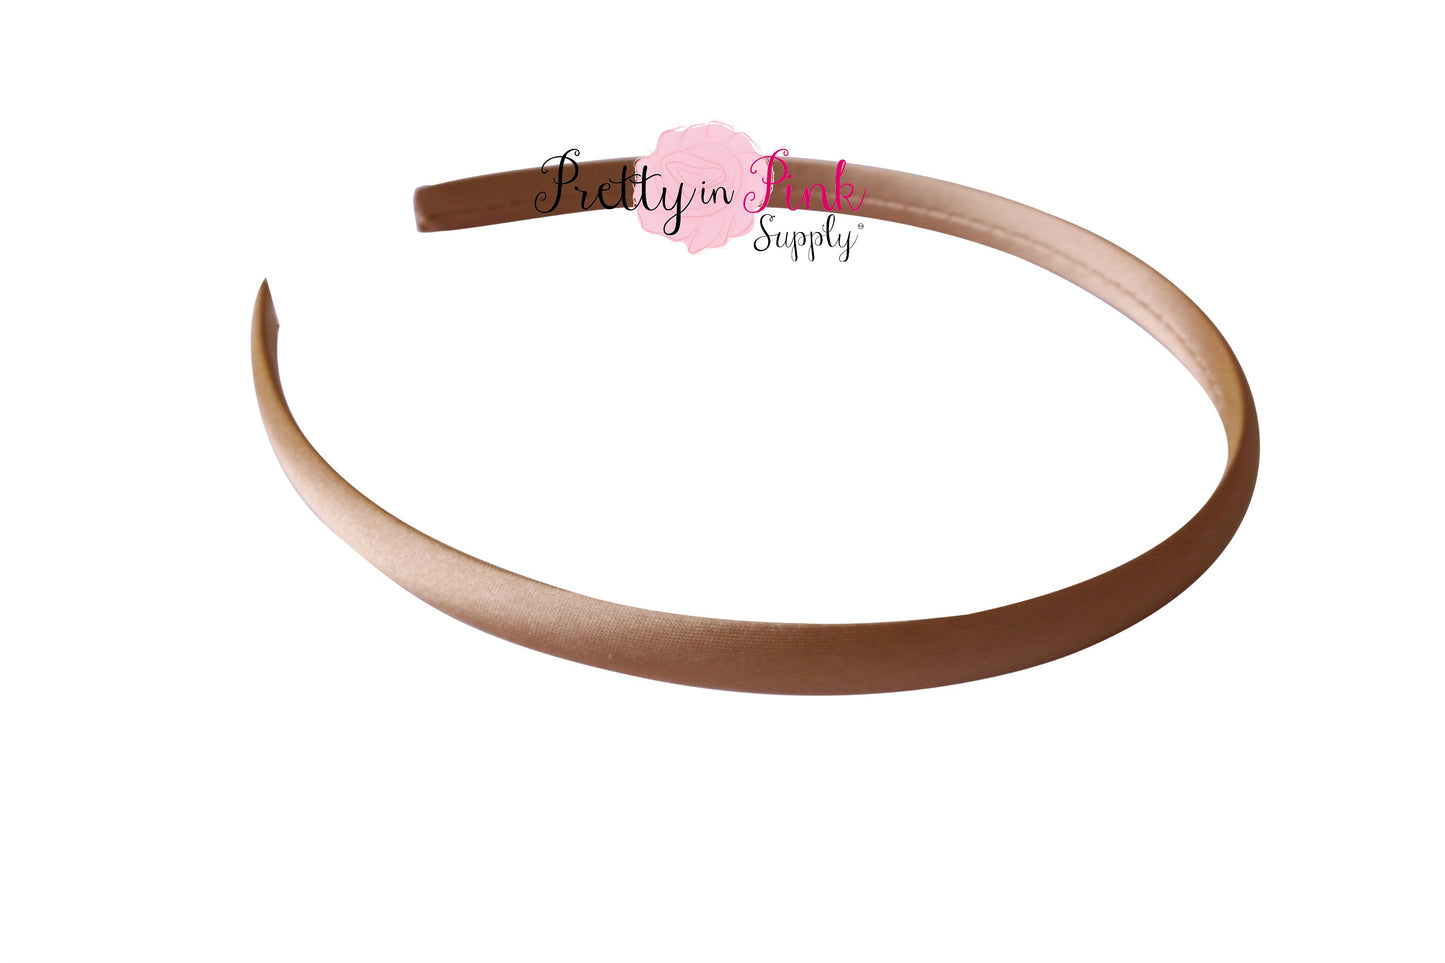 10mm Satin Lined Headband - Pretty in Pink Supply